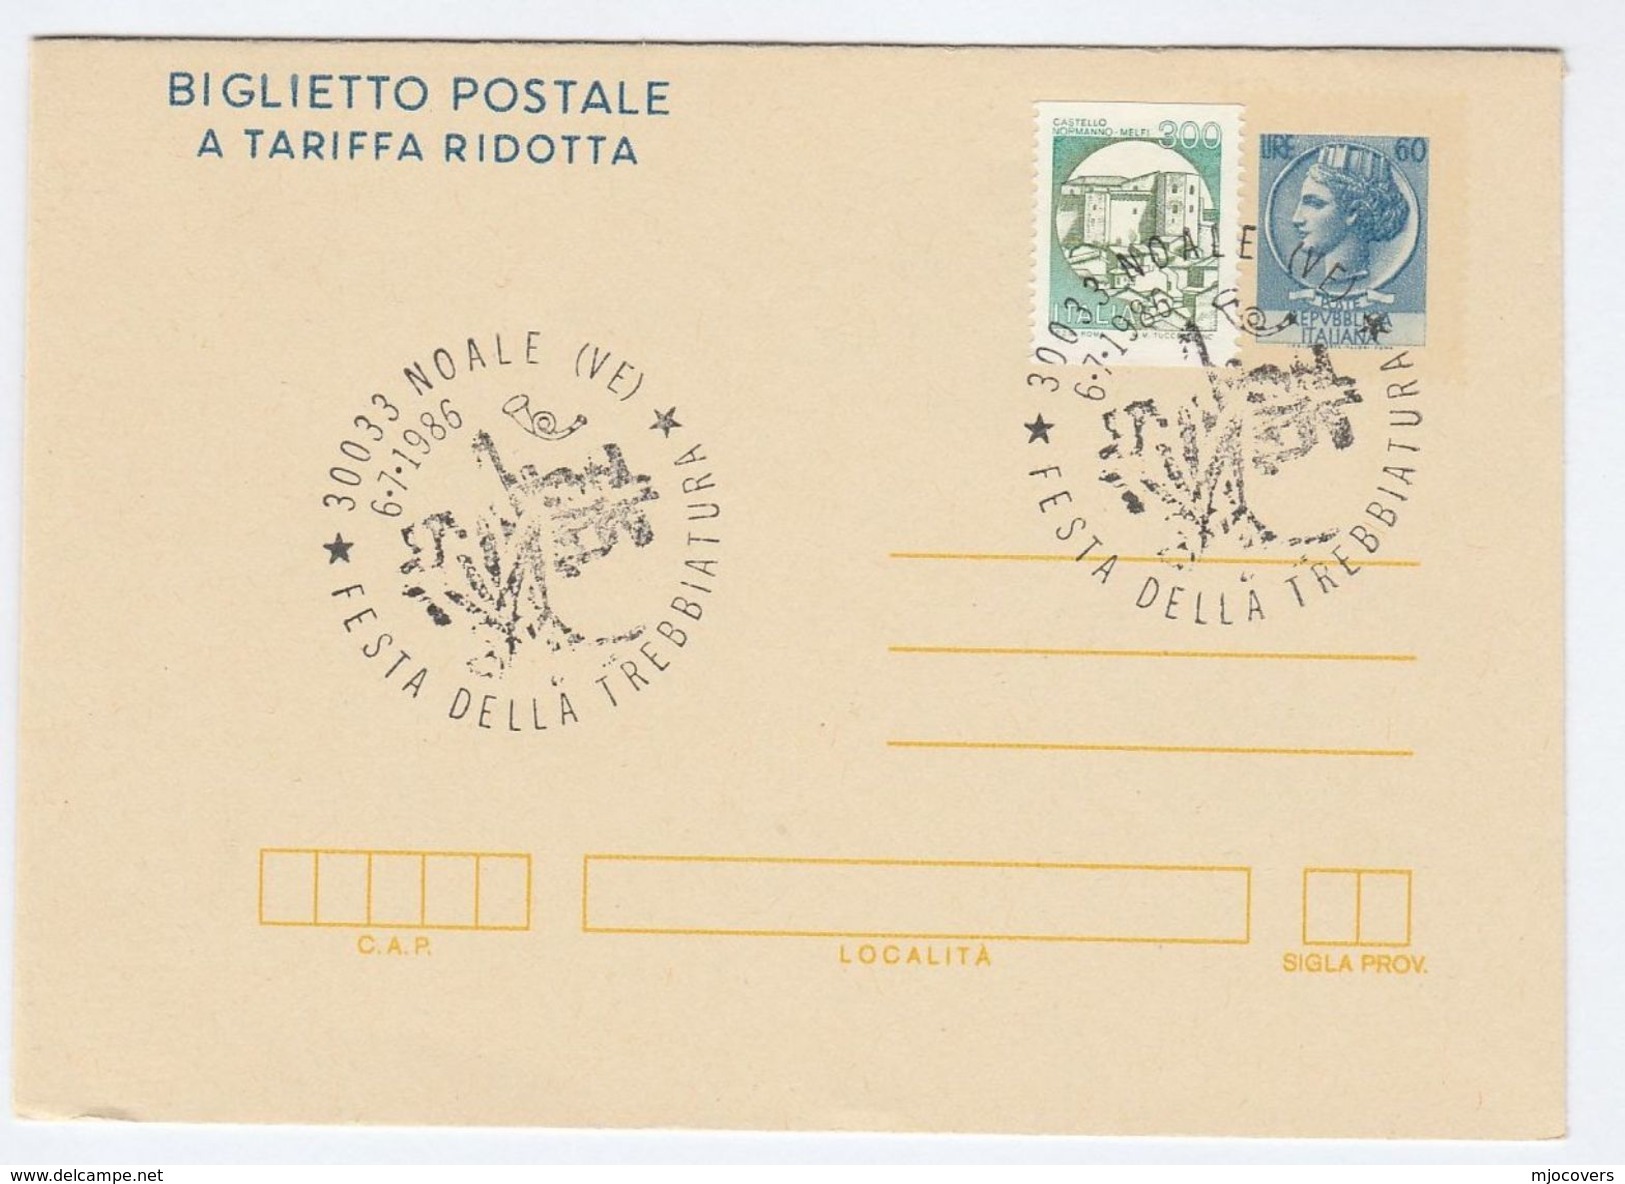 1986 NOALE THRESHING FESTIVAL  EVENT Postal STATIONERY LETTERSHEET Italy Stamps Uprated Cover Agriculture Farming - Agricultura